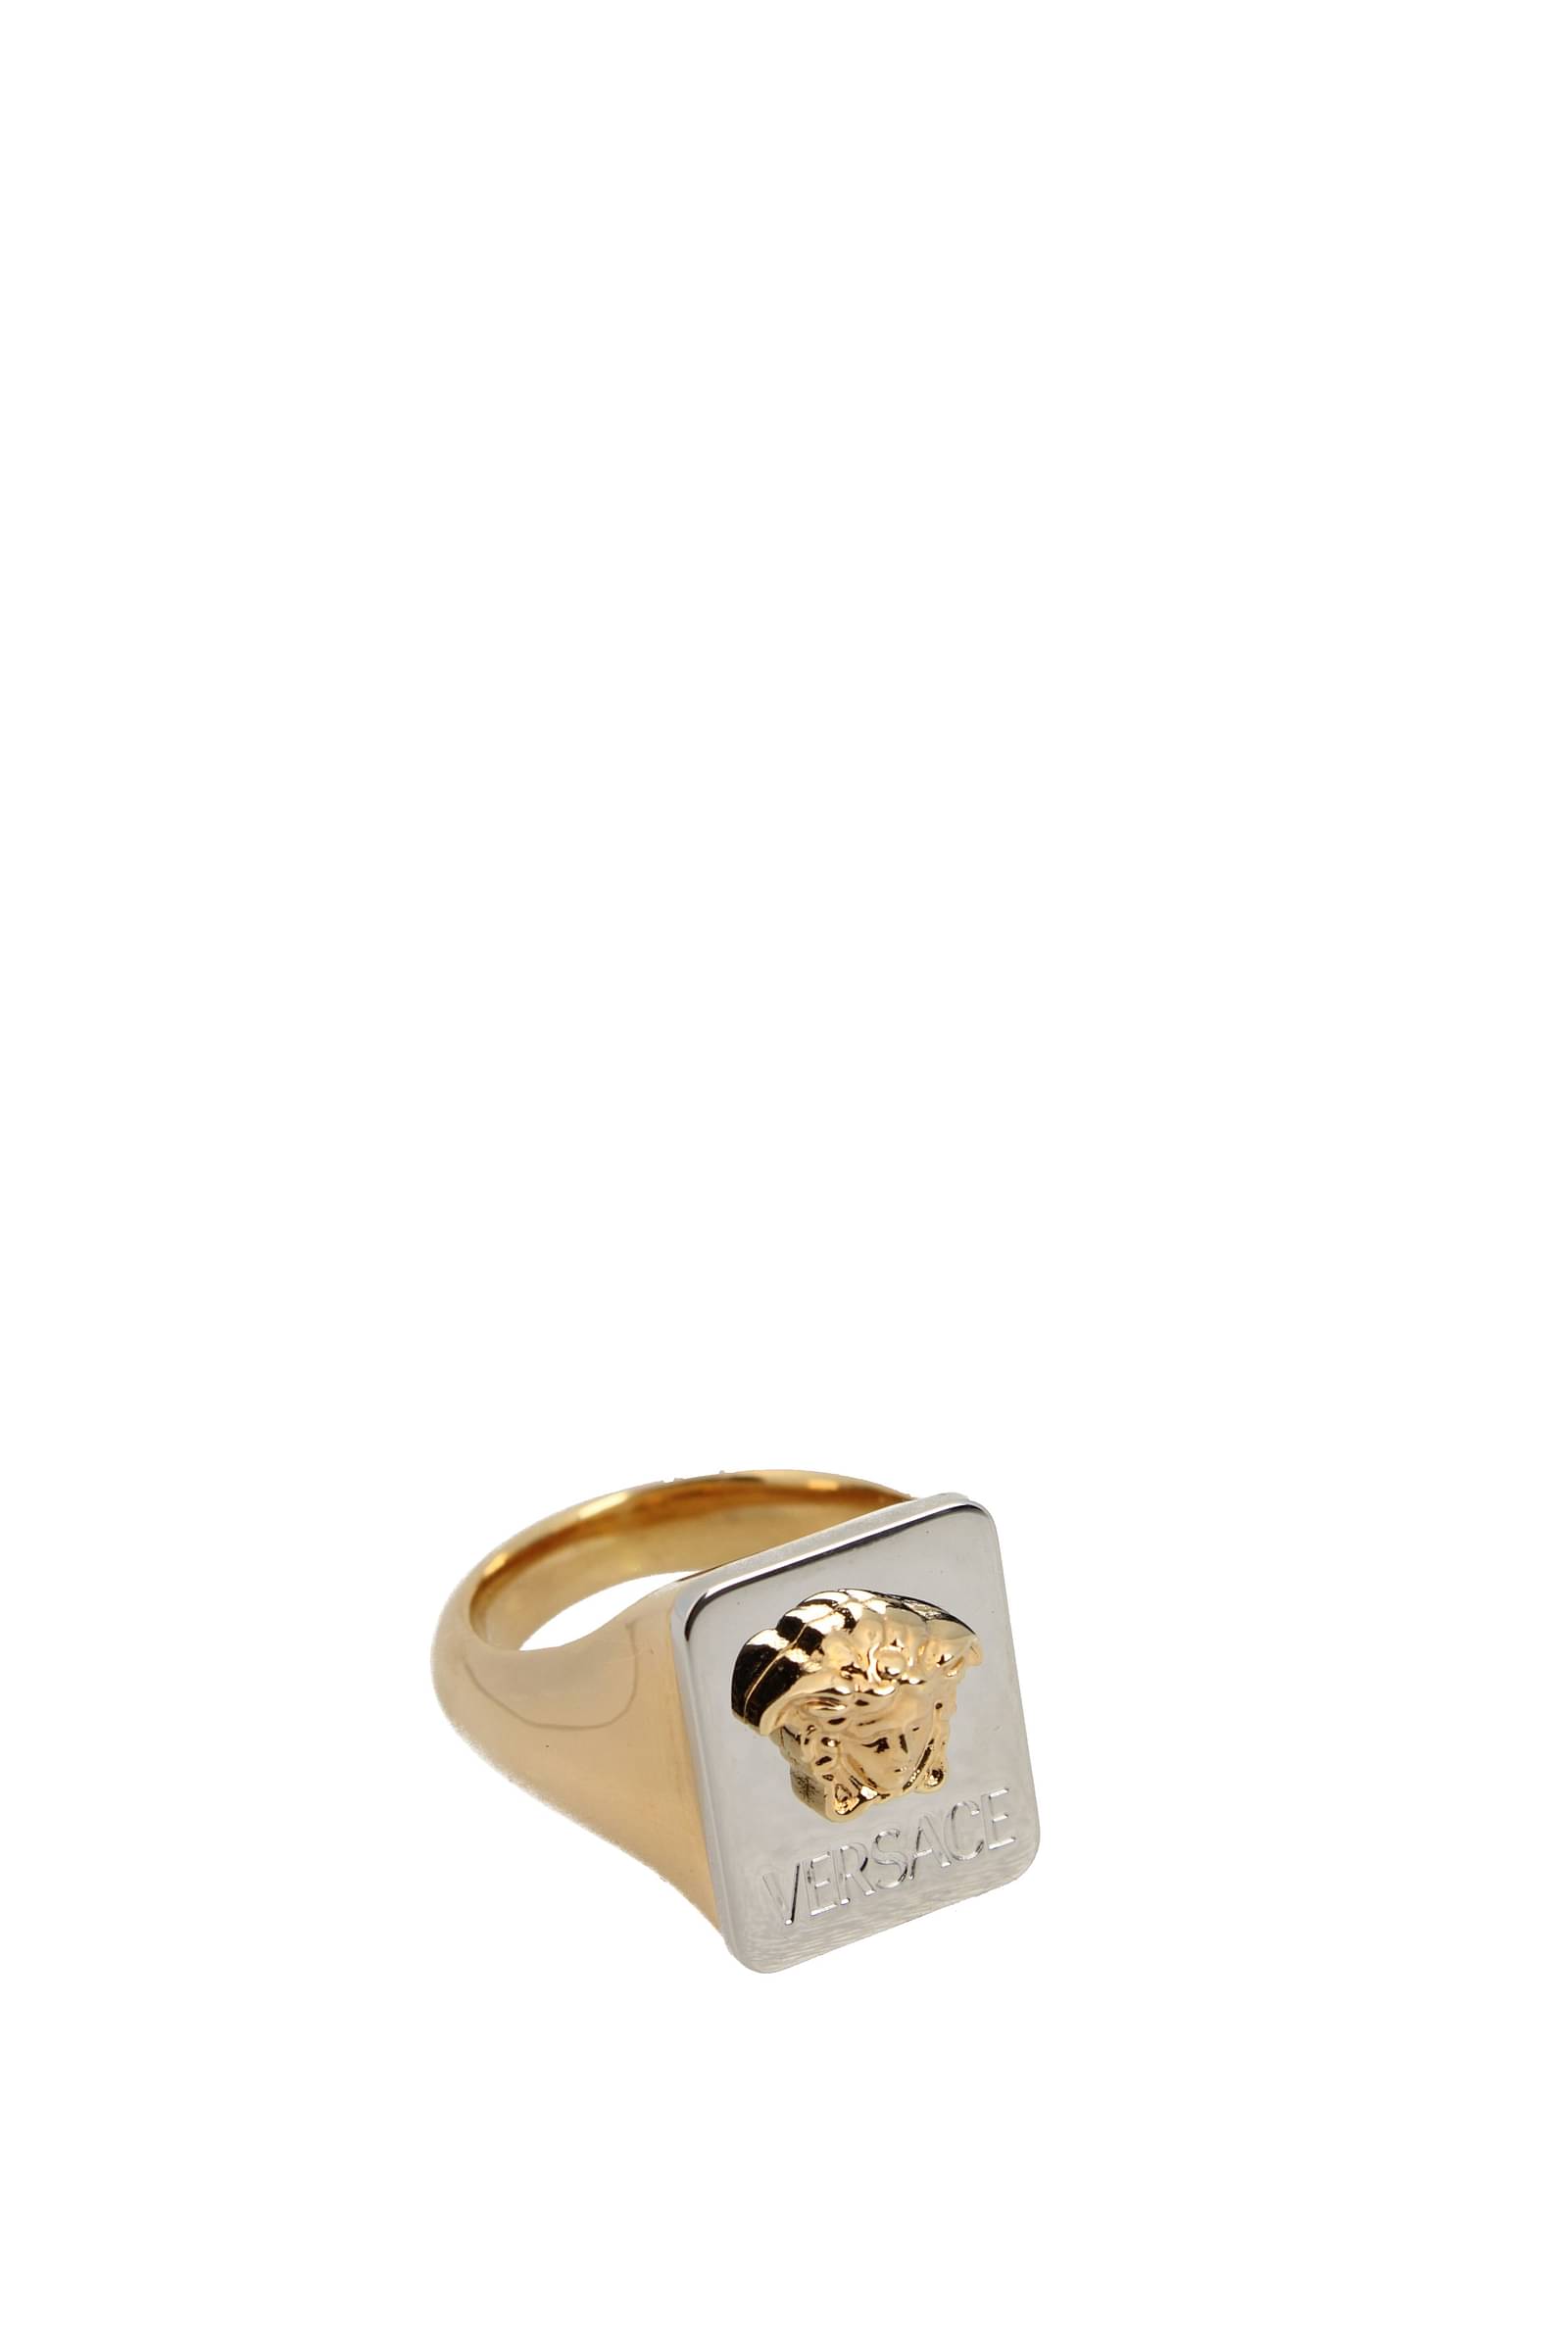 Gold Ring with logo Versace - IetpShops GB